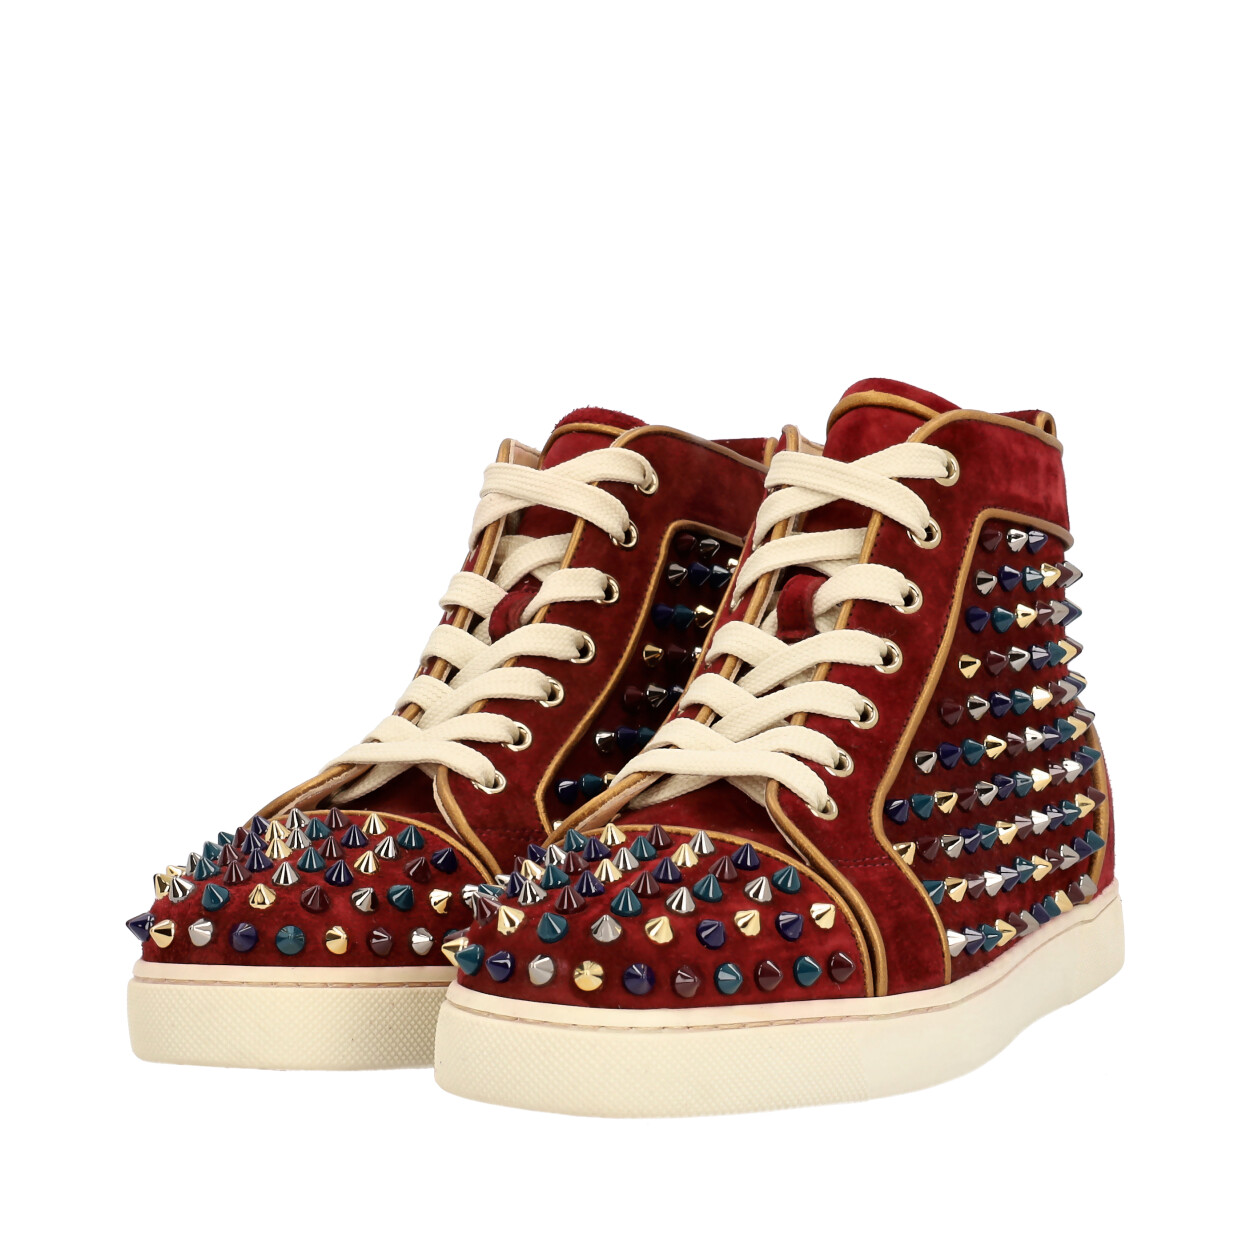 CHRISTIAN LOUBOUTIN Suede Louis Spike High Top Sneakers Burgundy | Luxity